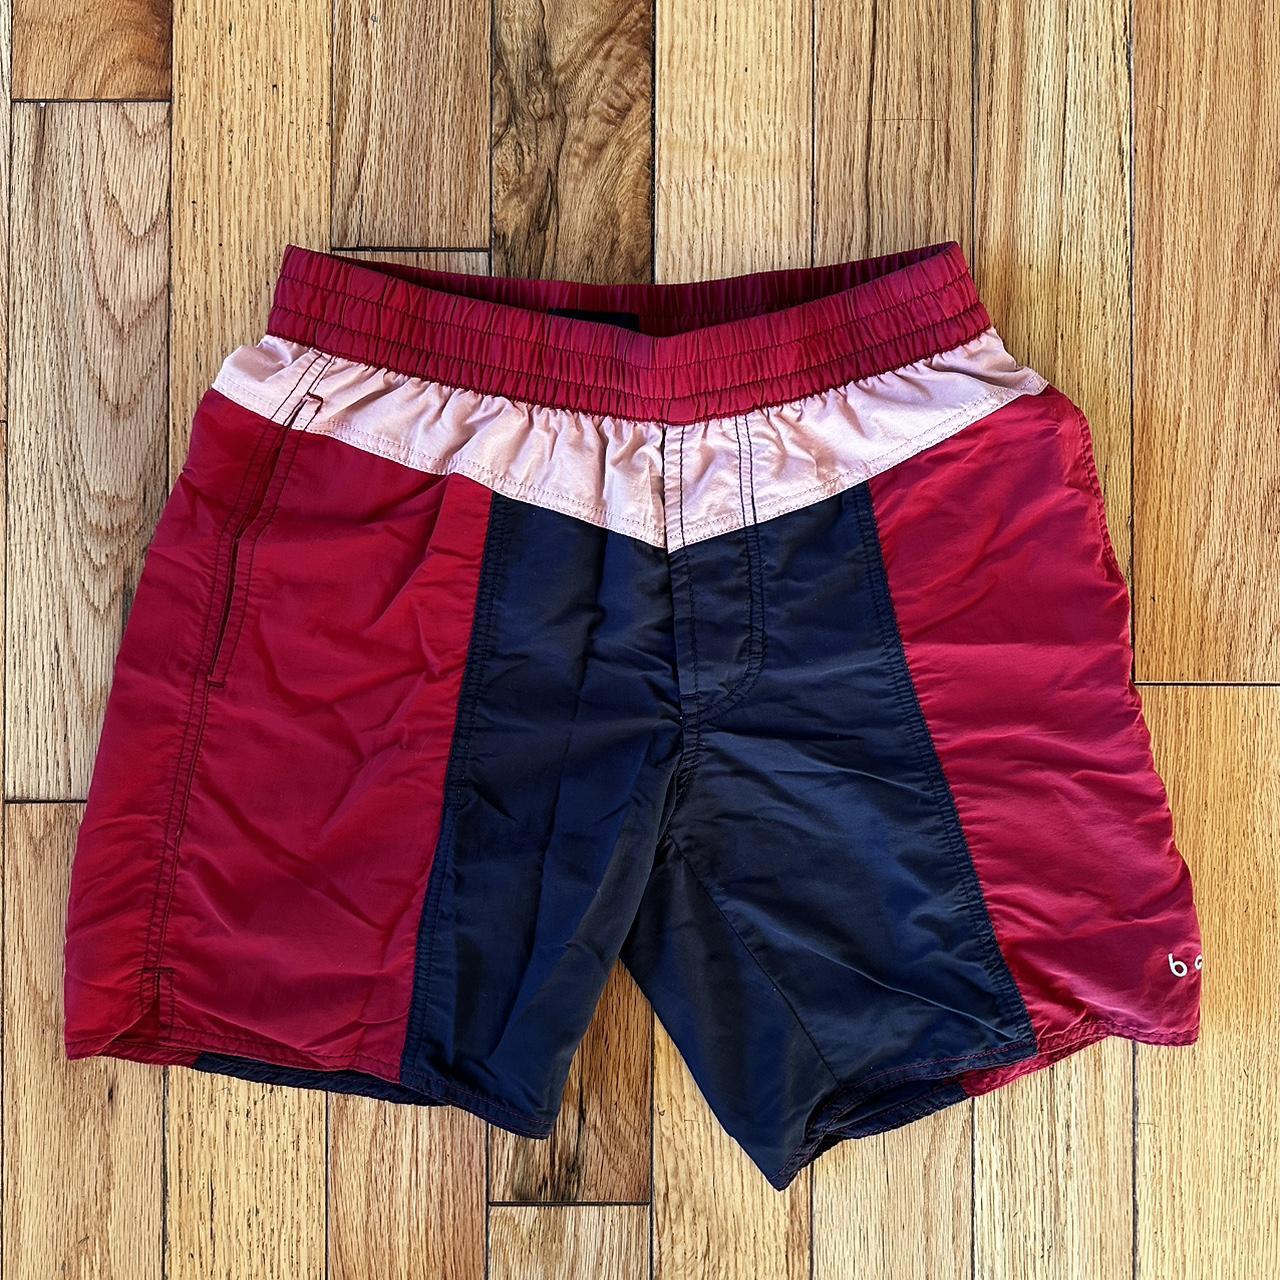 Barney Cools Men's Blue and Burgundy Shorts